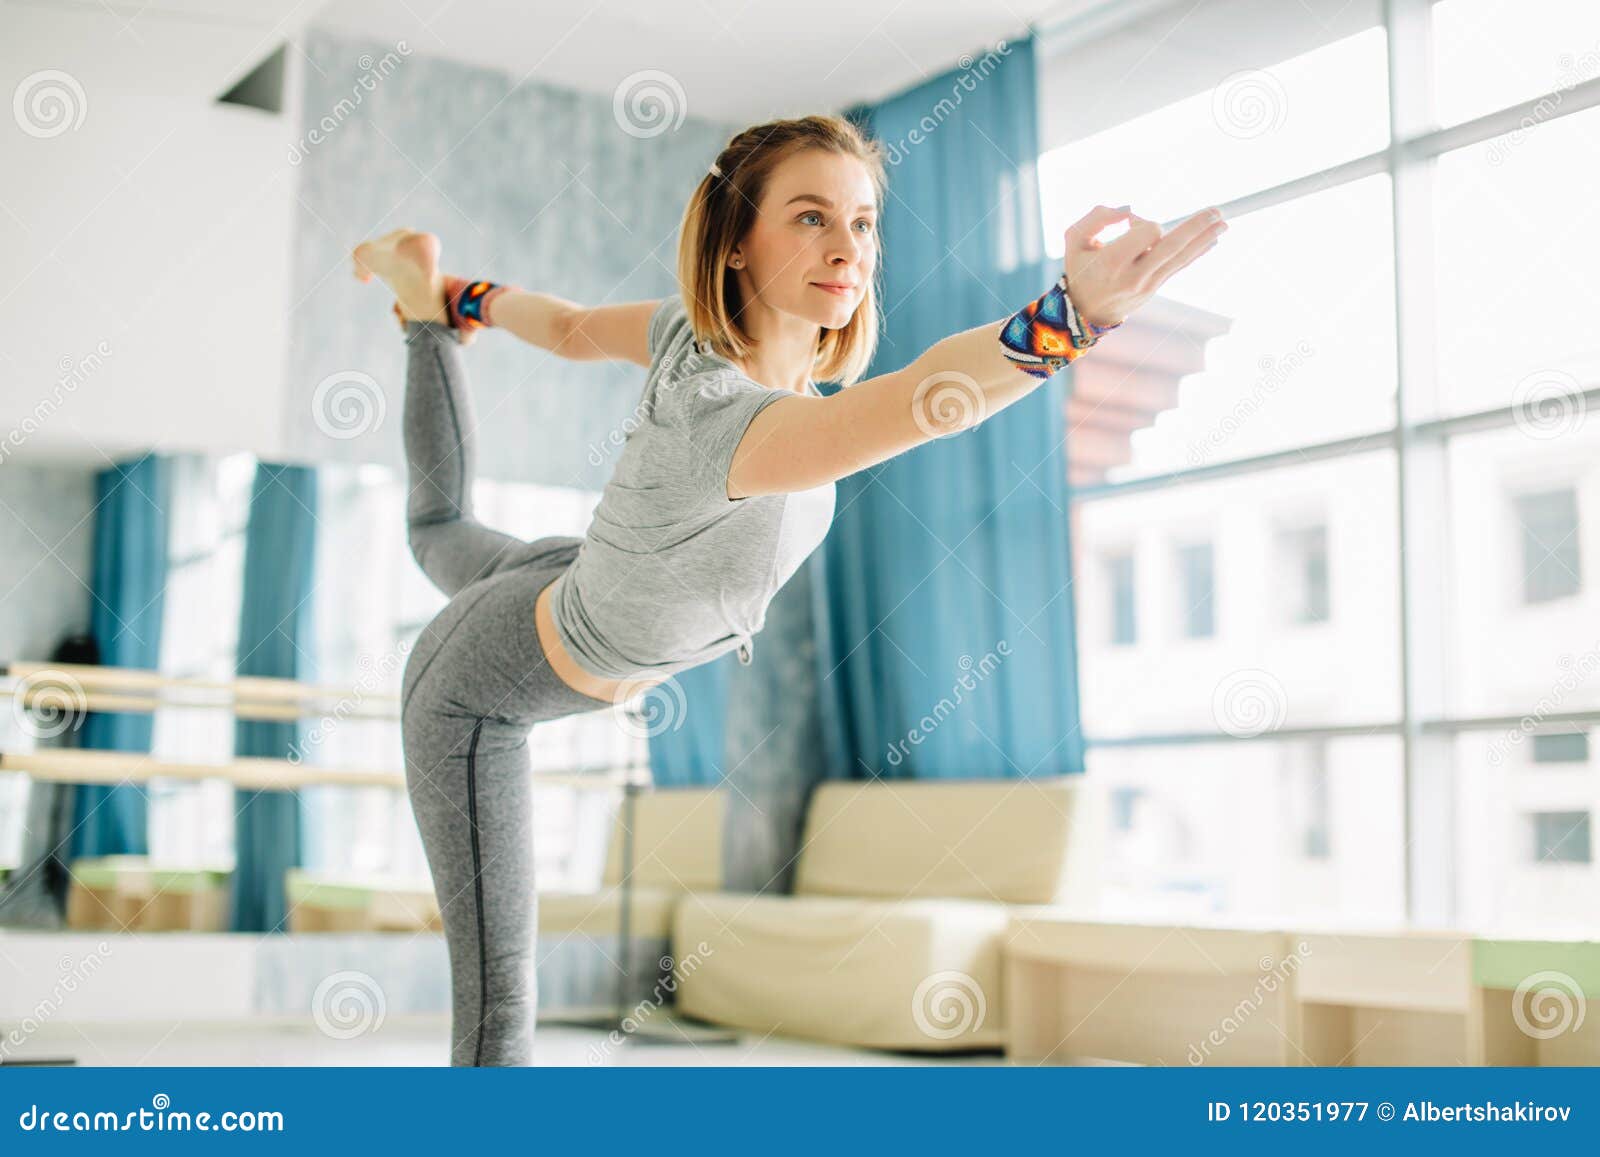 Young Fit Woman Doing a Yoga Pose Standing with One Leg Raised Up. Stock  Image - Image of portrait, caucasian: 120351977